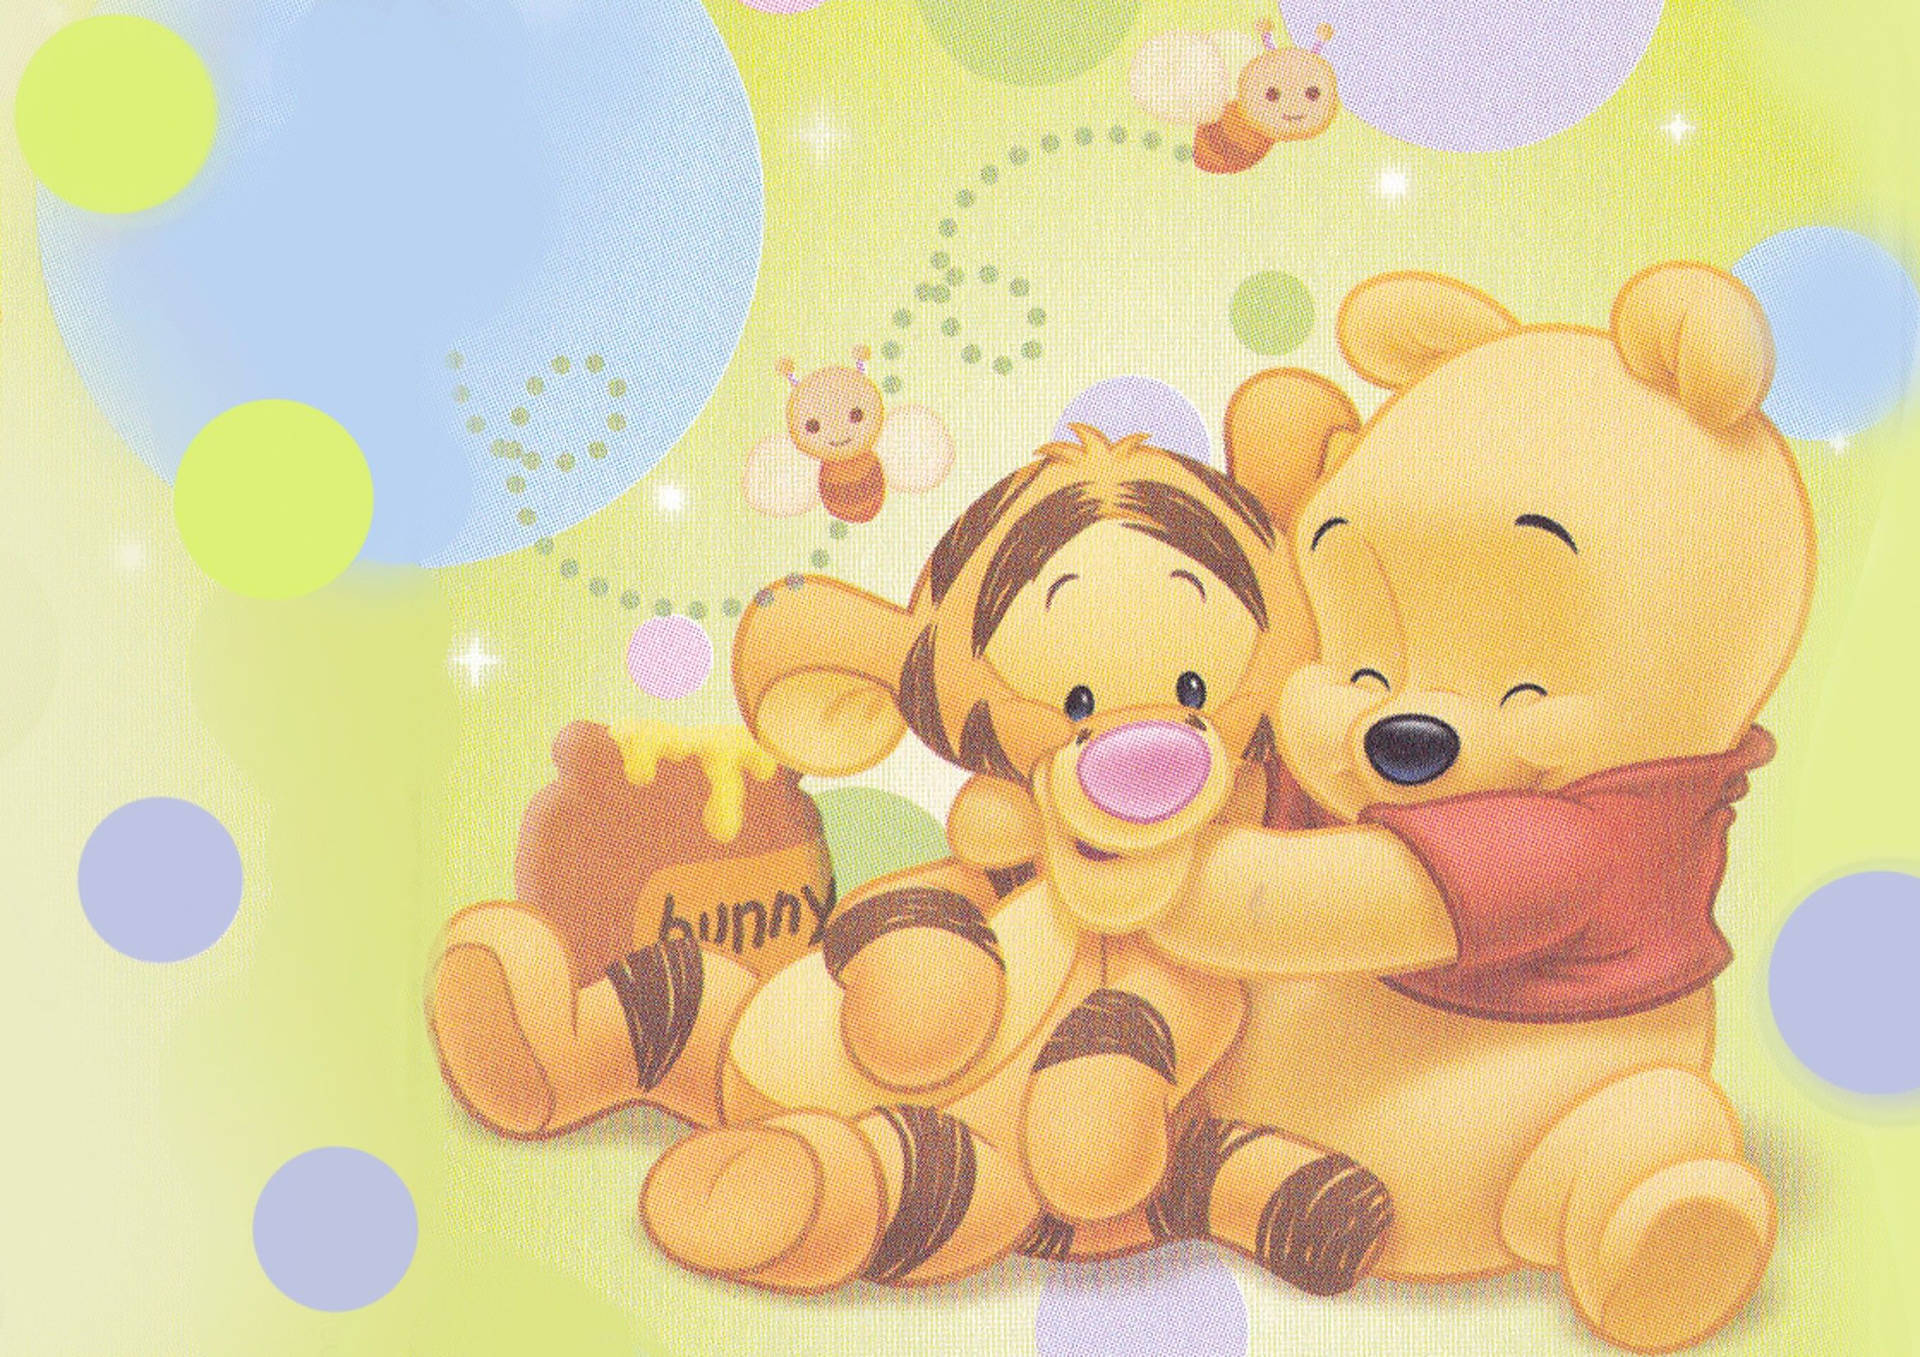 “tigger And Winnie The Pooh Having Fun In A Polka Dot World” Background